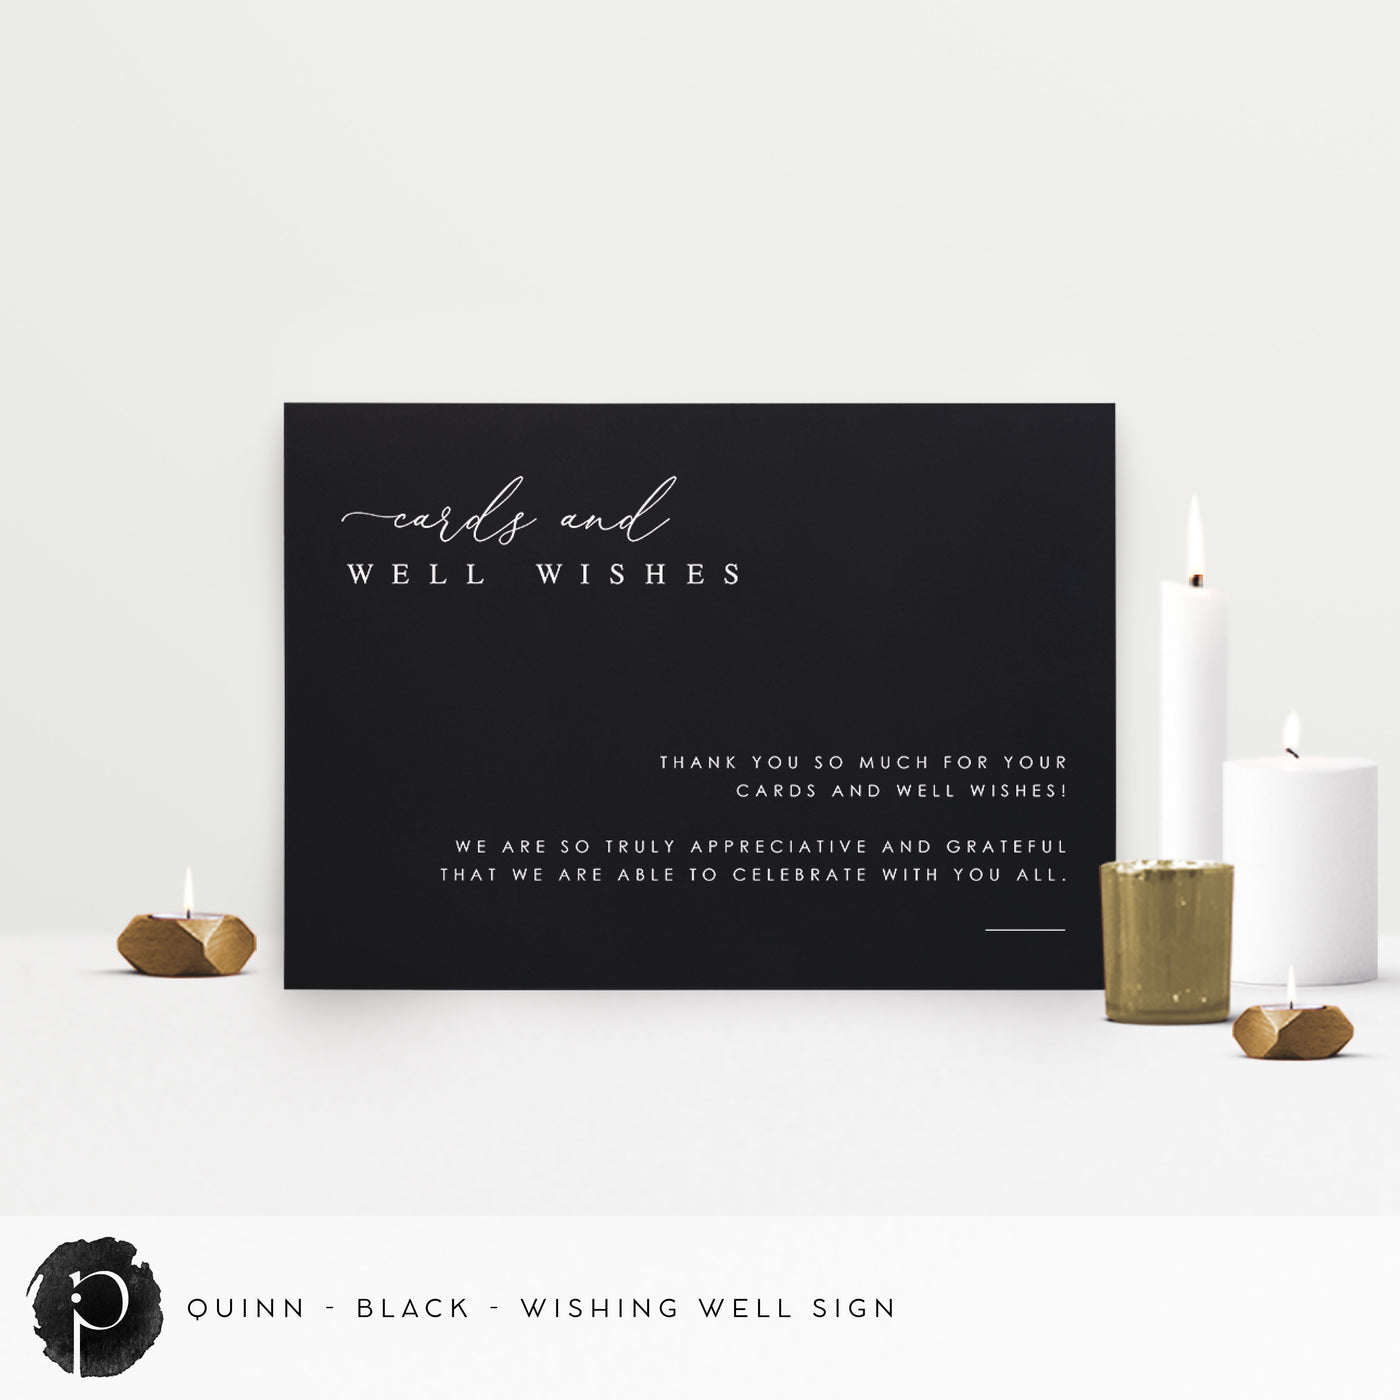 Quinn - Cards/Gifts/Presents/Wishing Well Table Sign